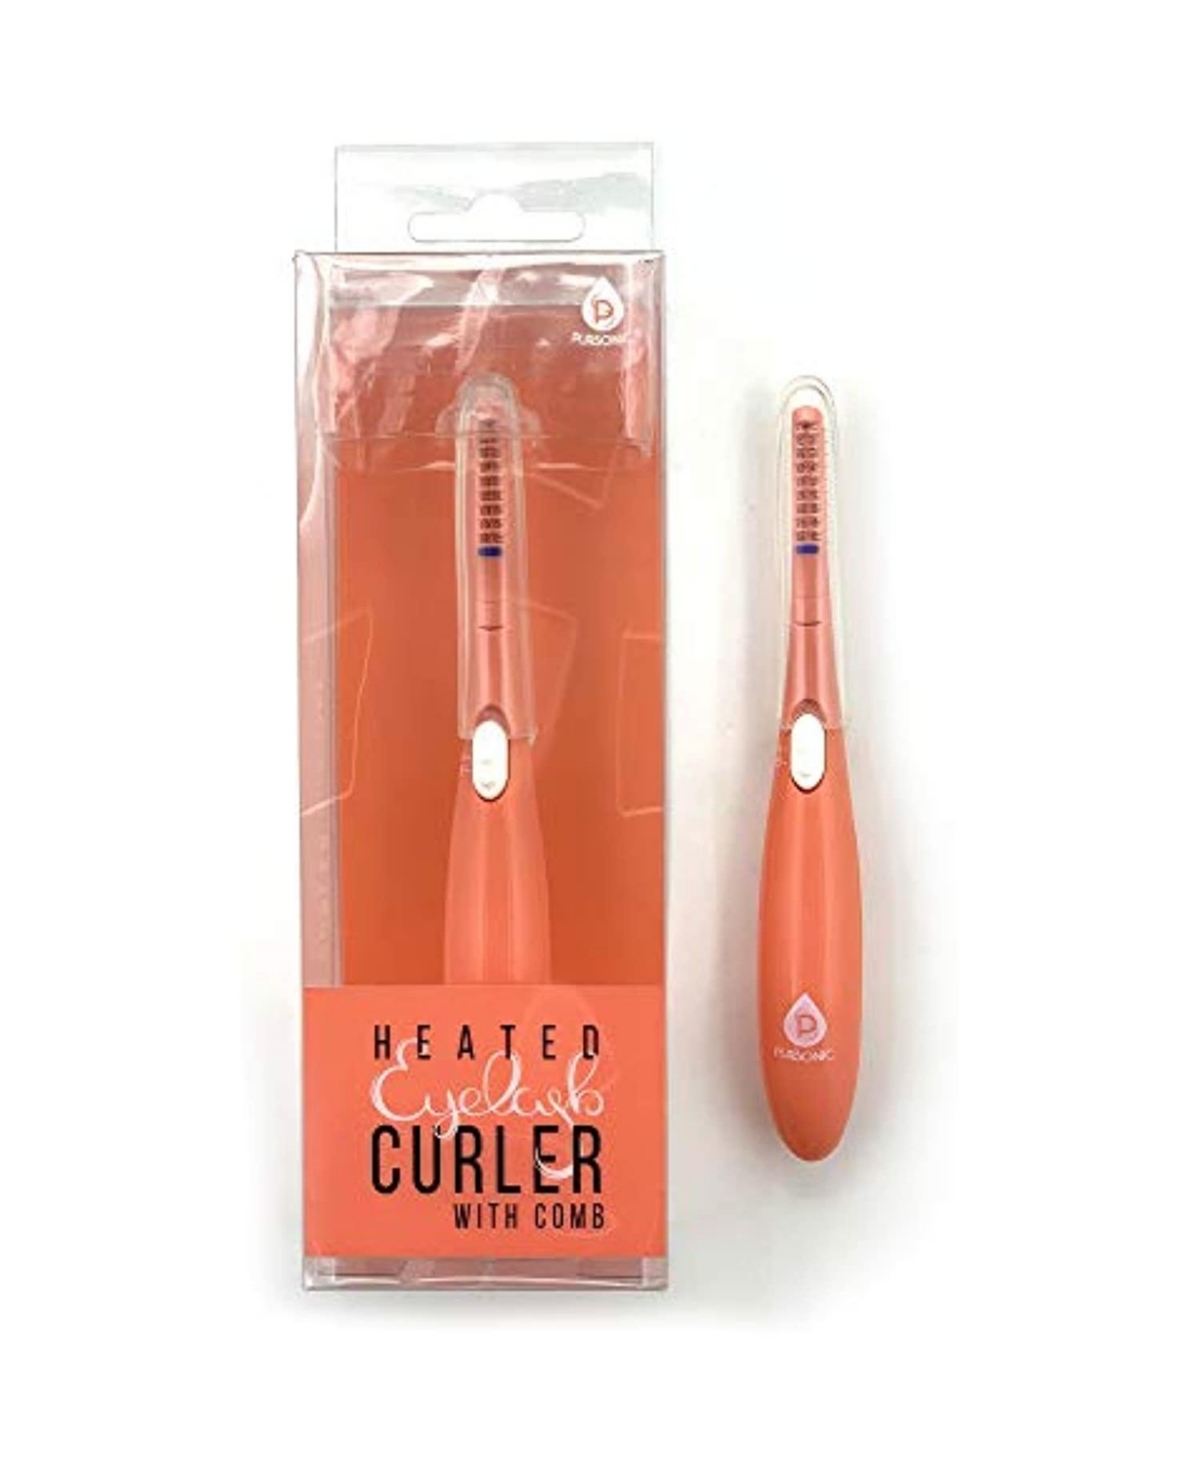 Heated Eyelash Curler with Comb, Provides Long Lasting Curl in Seconds - Orange